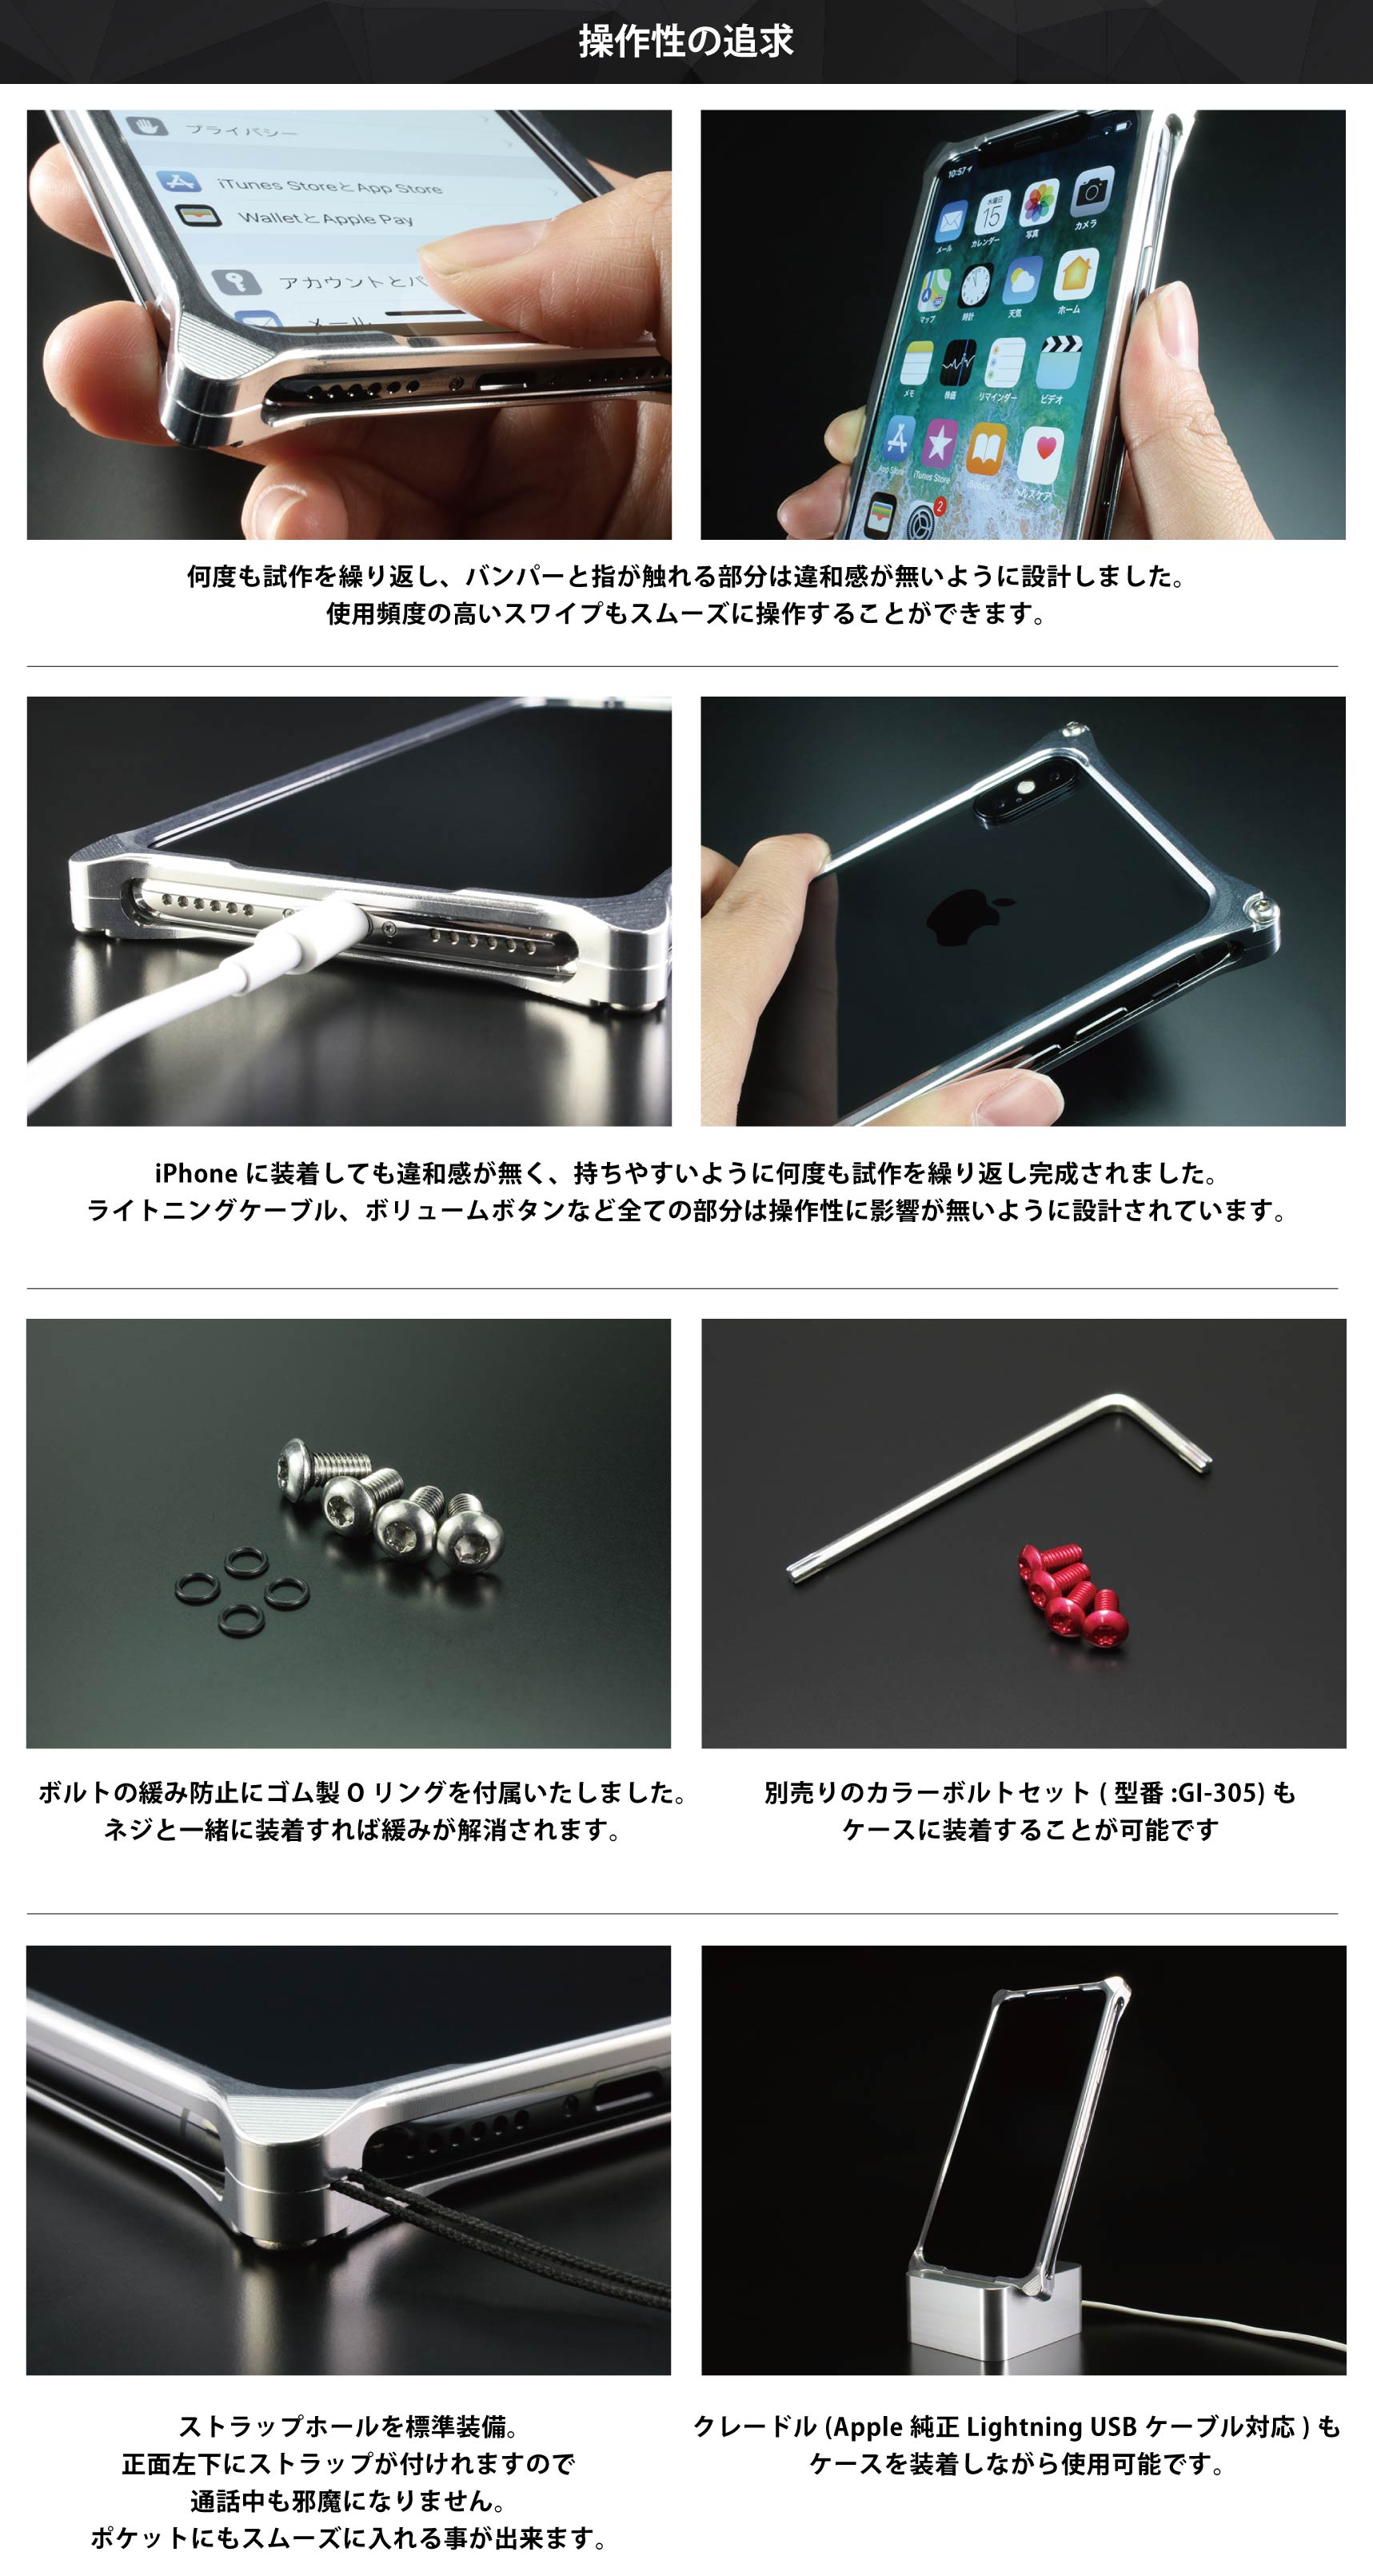 MONSTER HUNTER 15周年記念モデル Solidbumper for iPhone XS/X